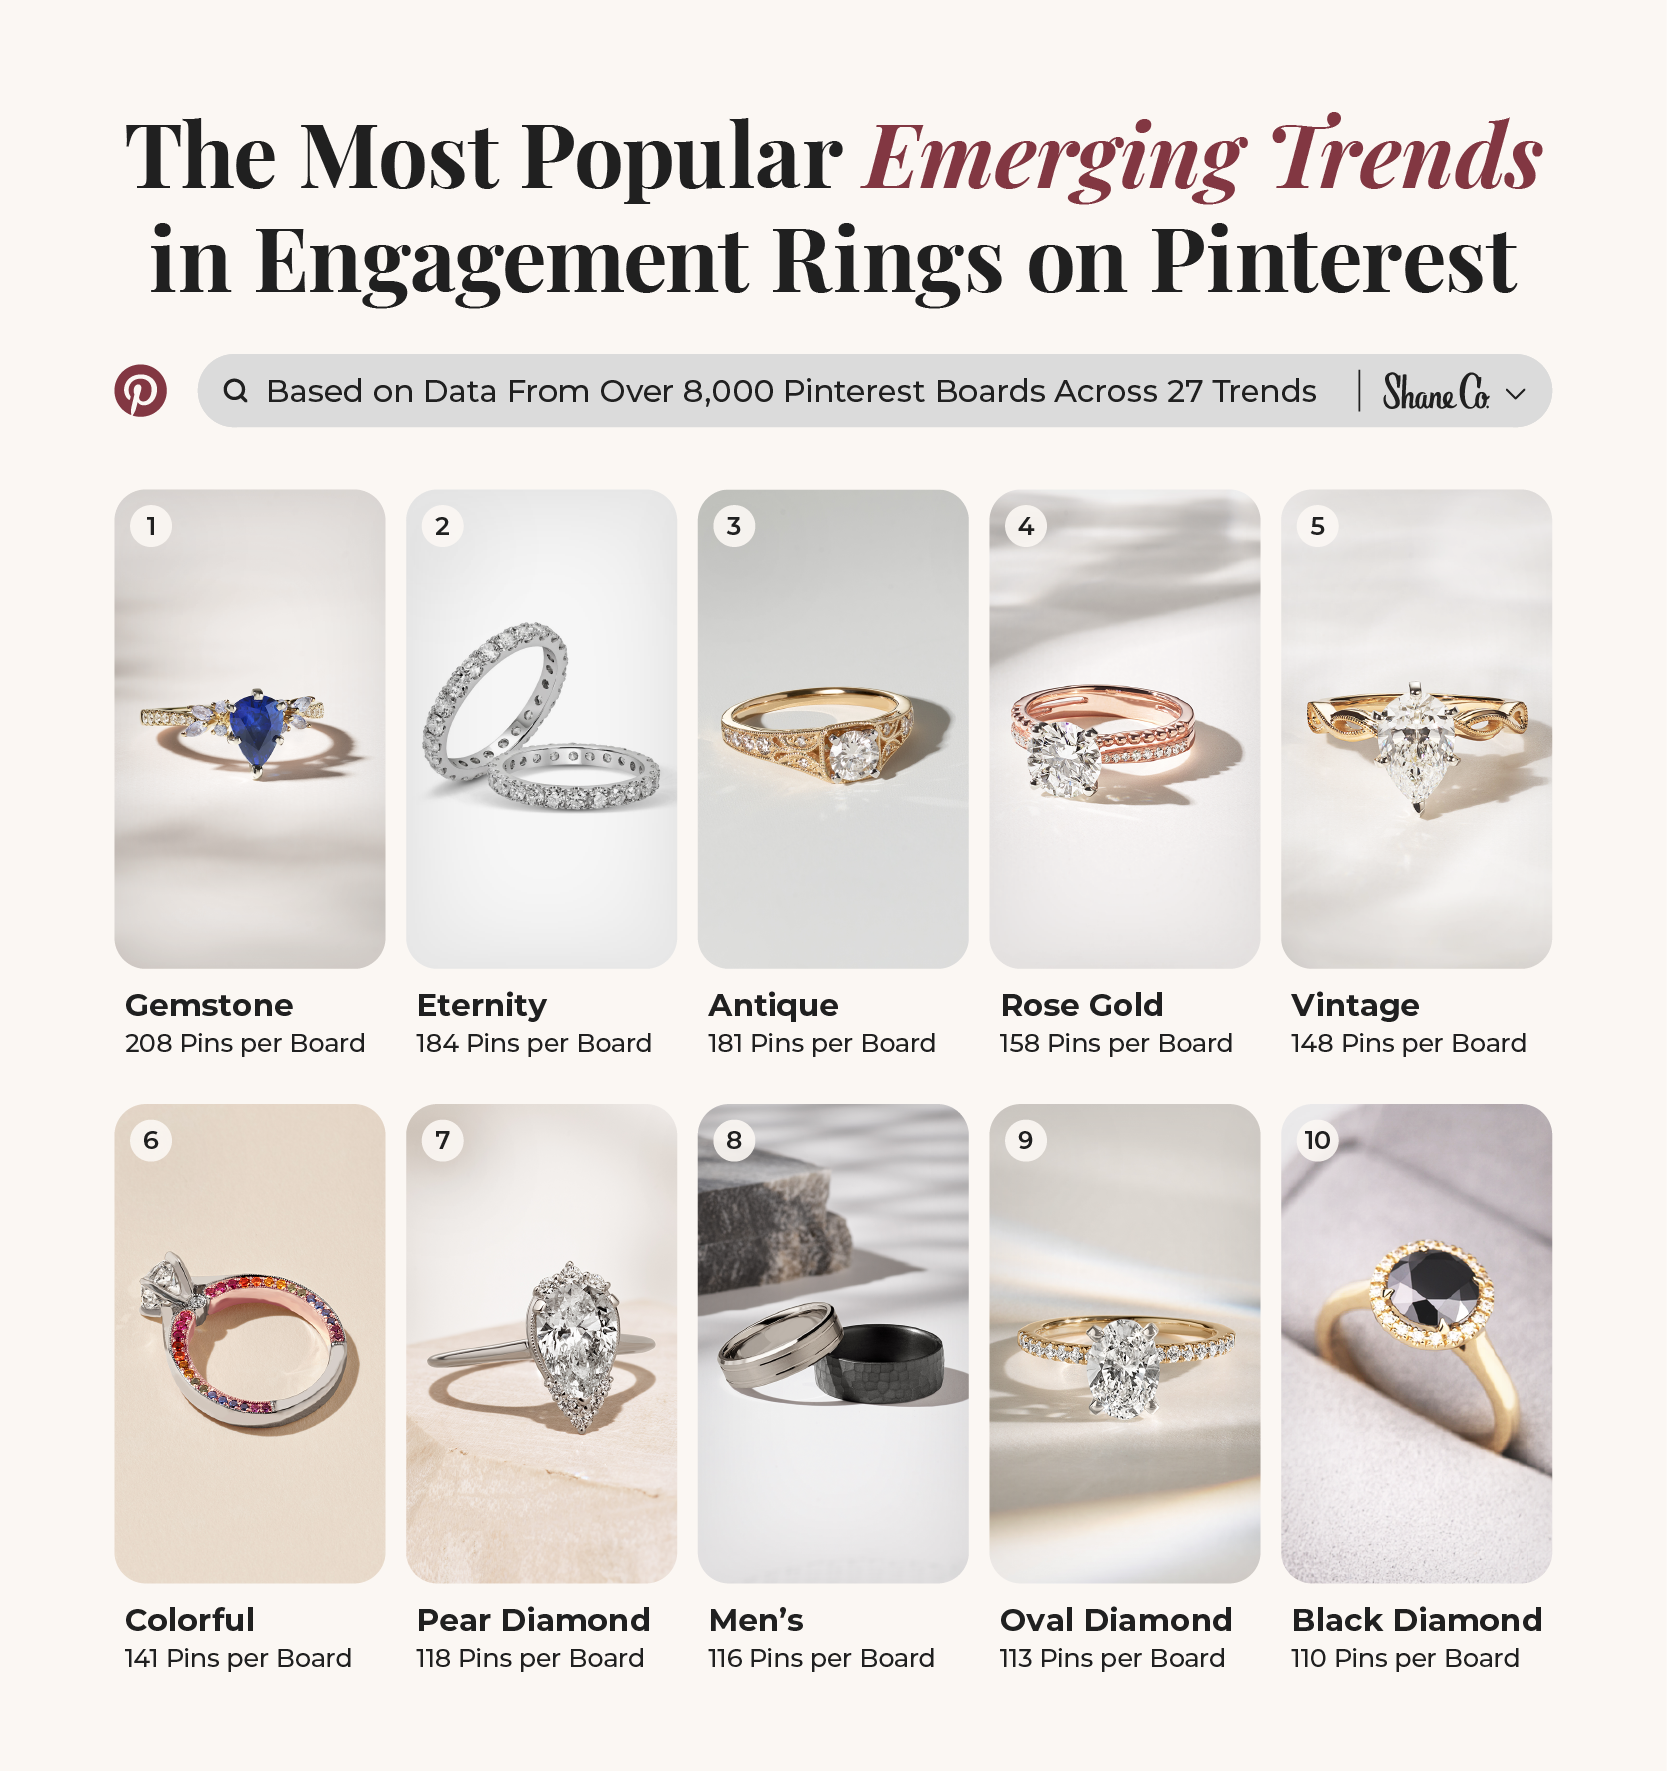 A graphic showing the engagement ring trends with the most pins per board on Pinterest